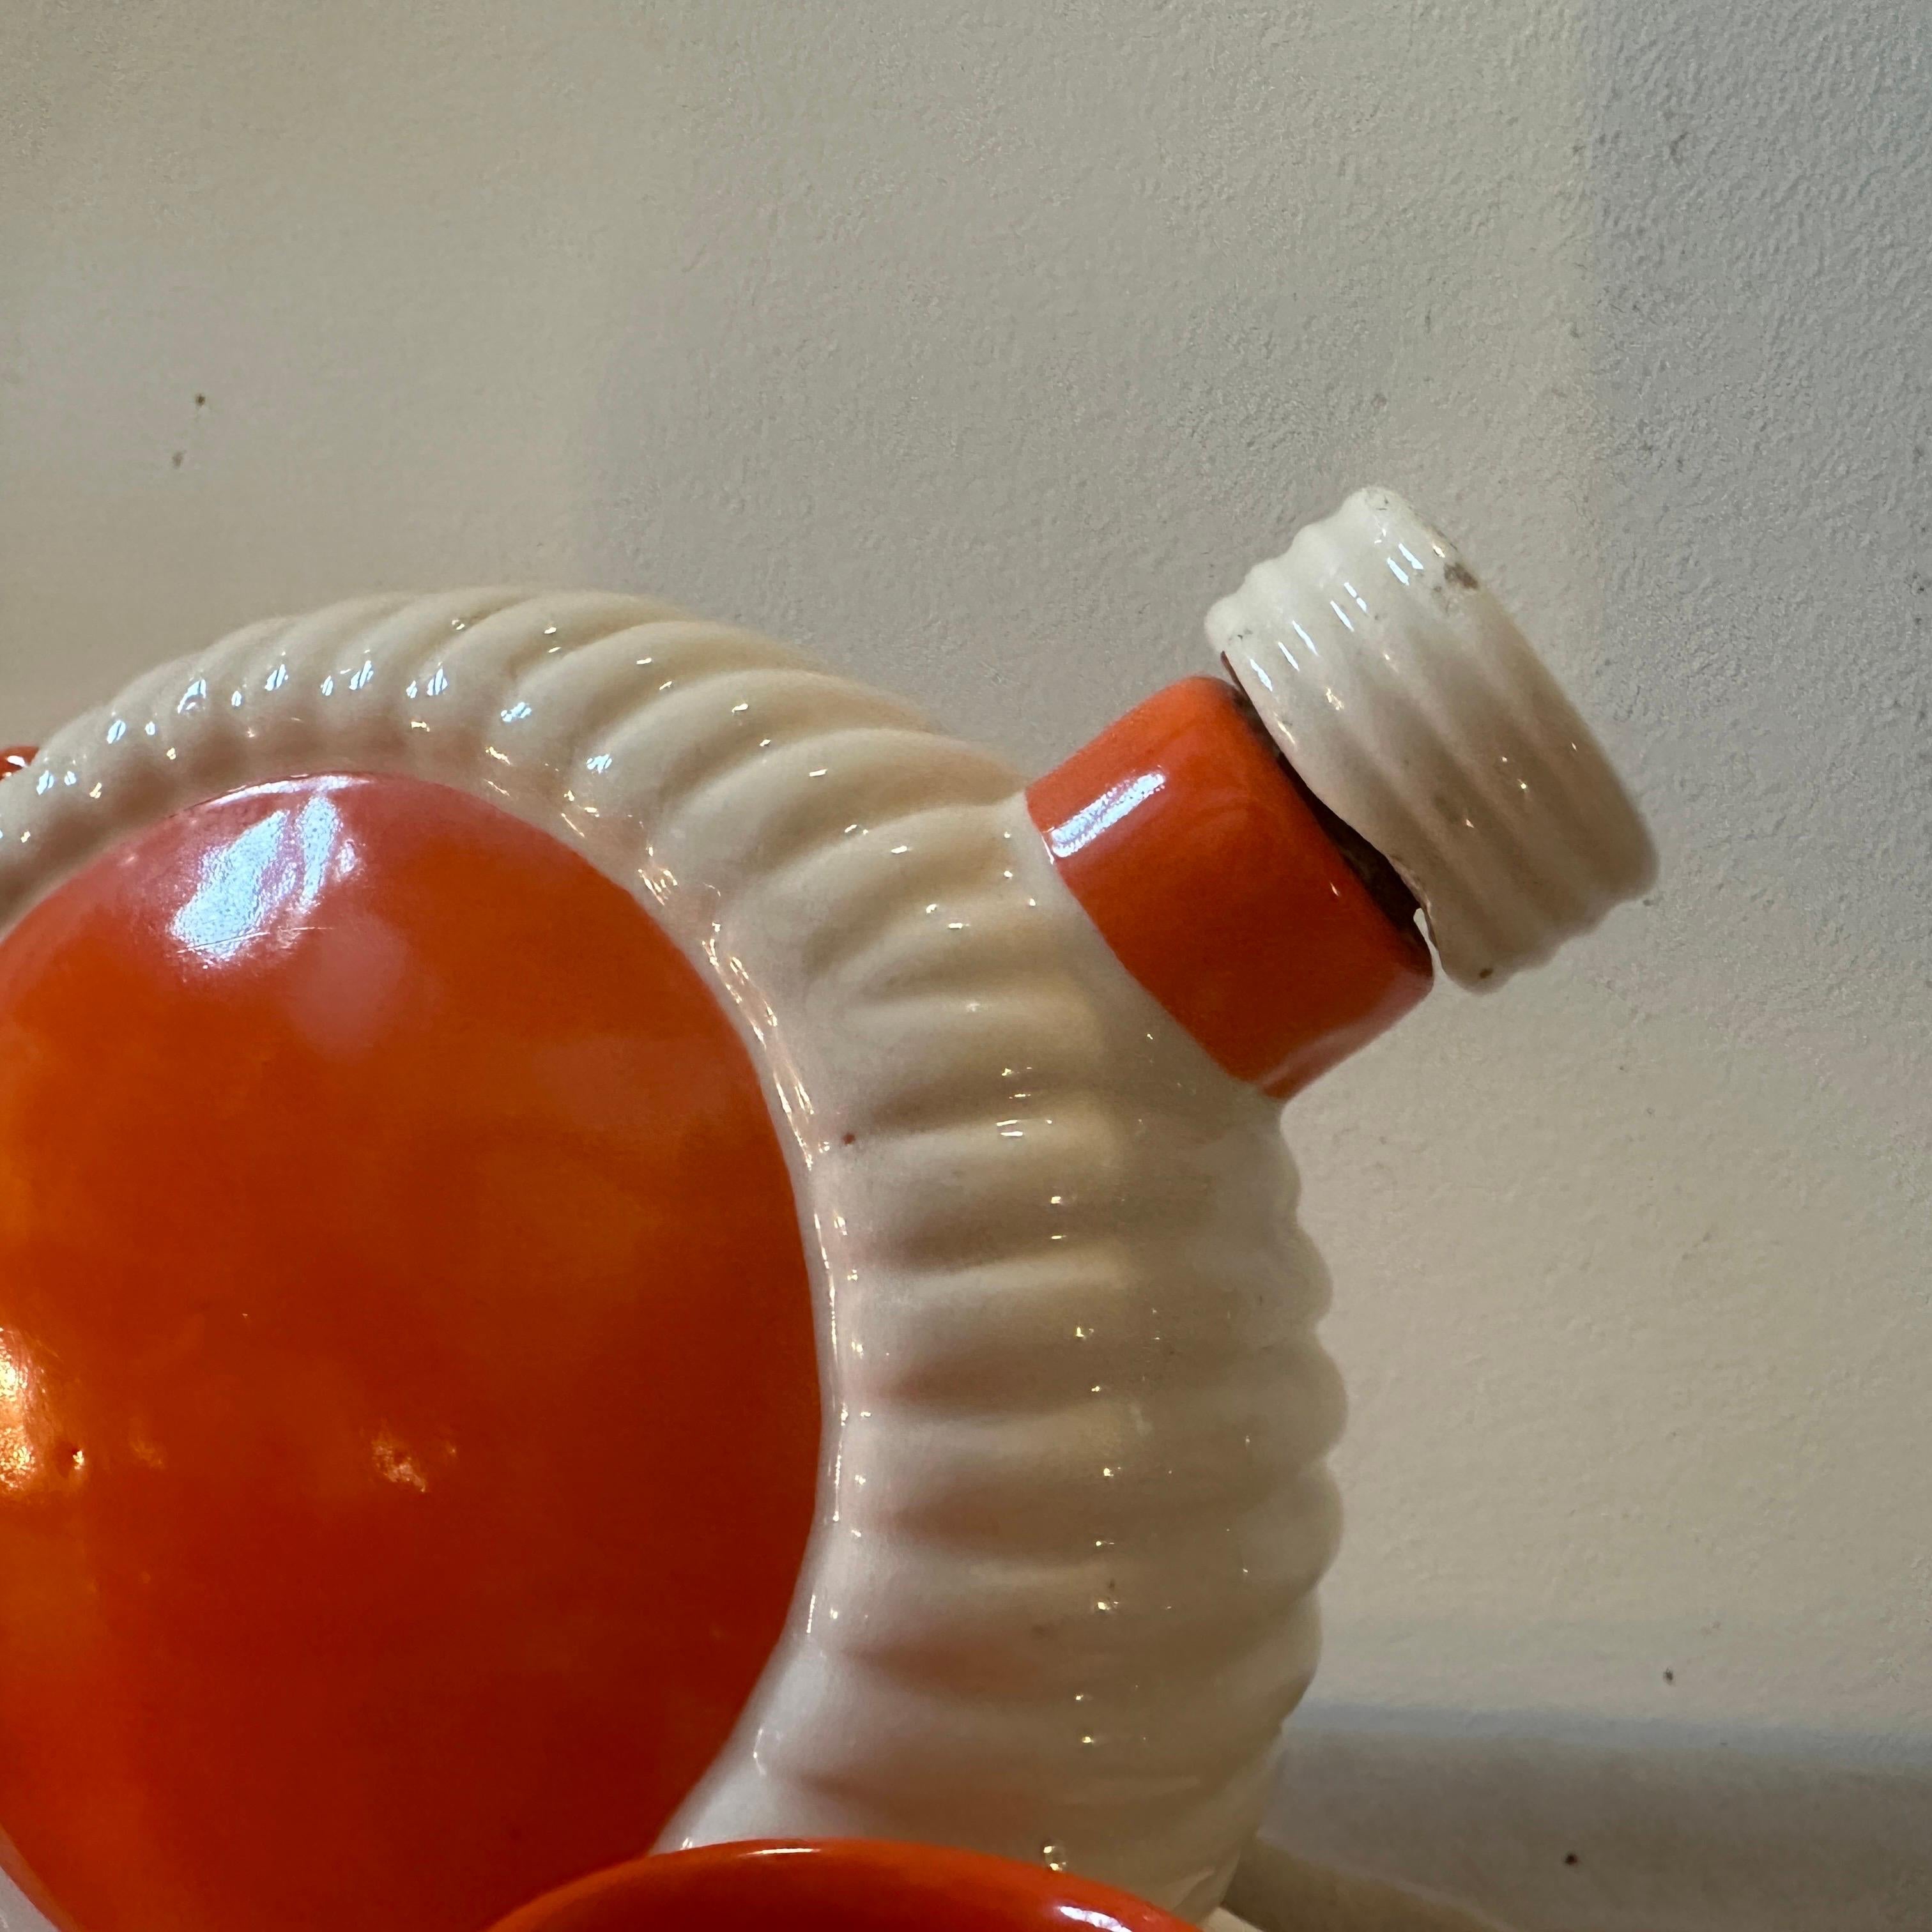 Hand-Crafted 1930s Art Deco Orange and White Ceramic Rosolio Set by Rometti Umbertide For Sale